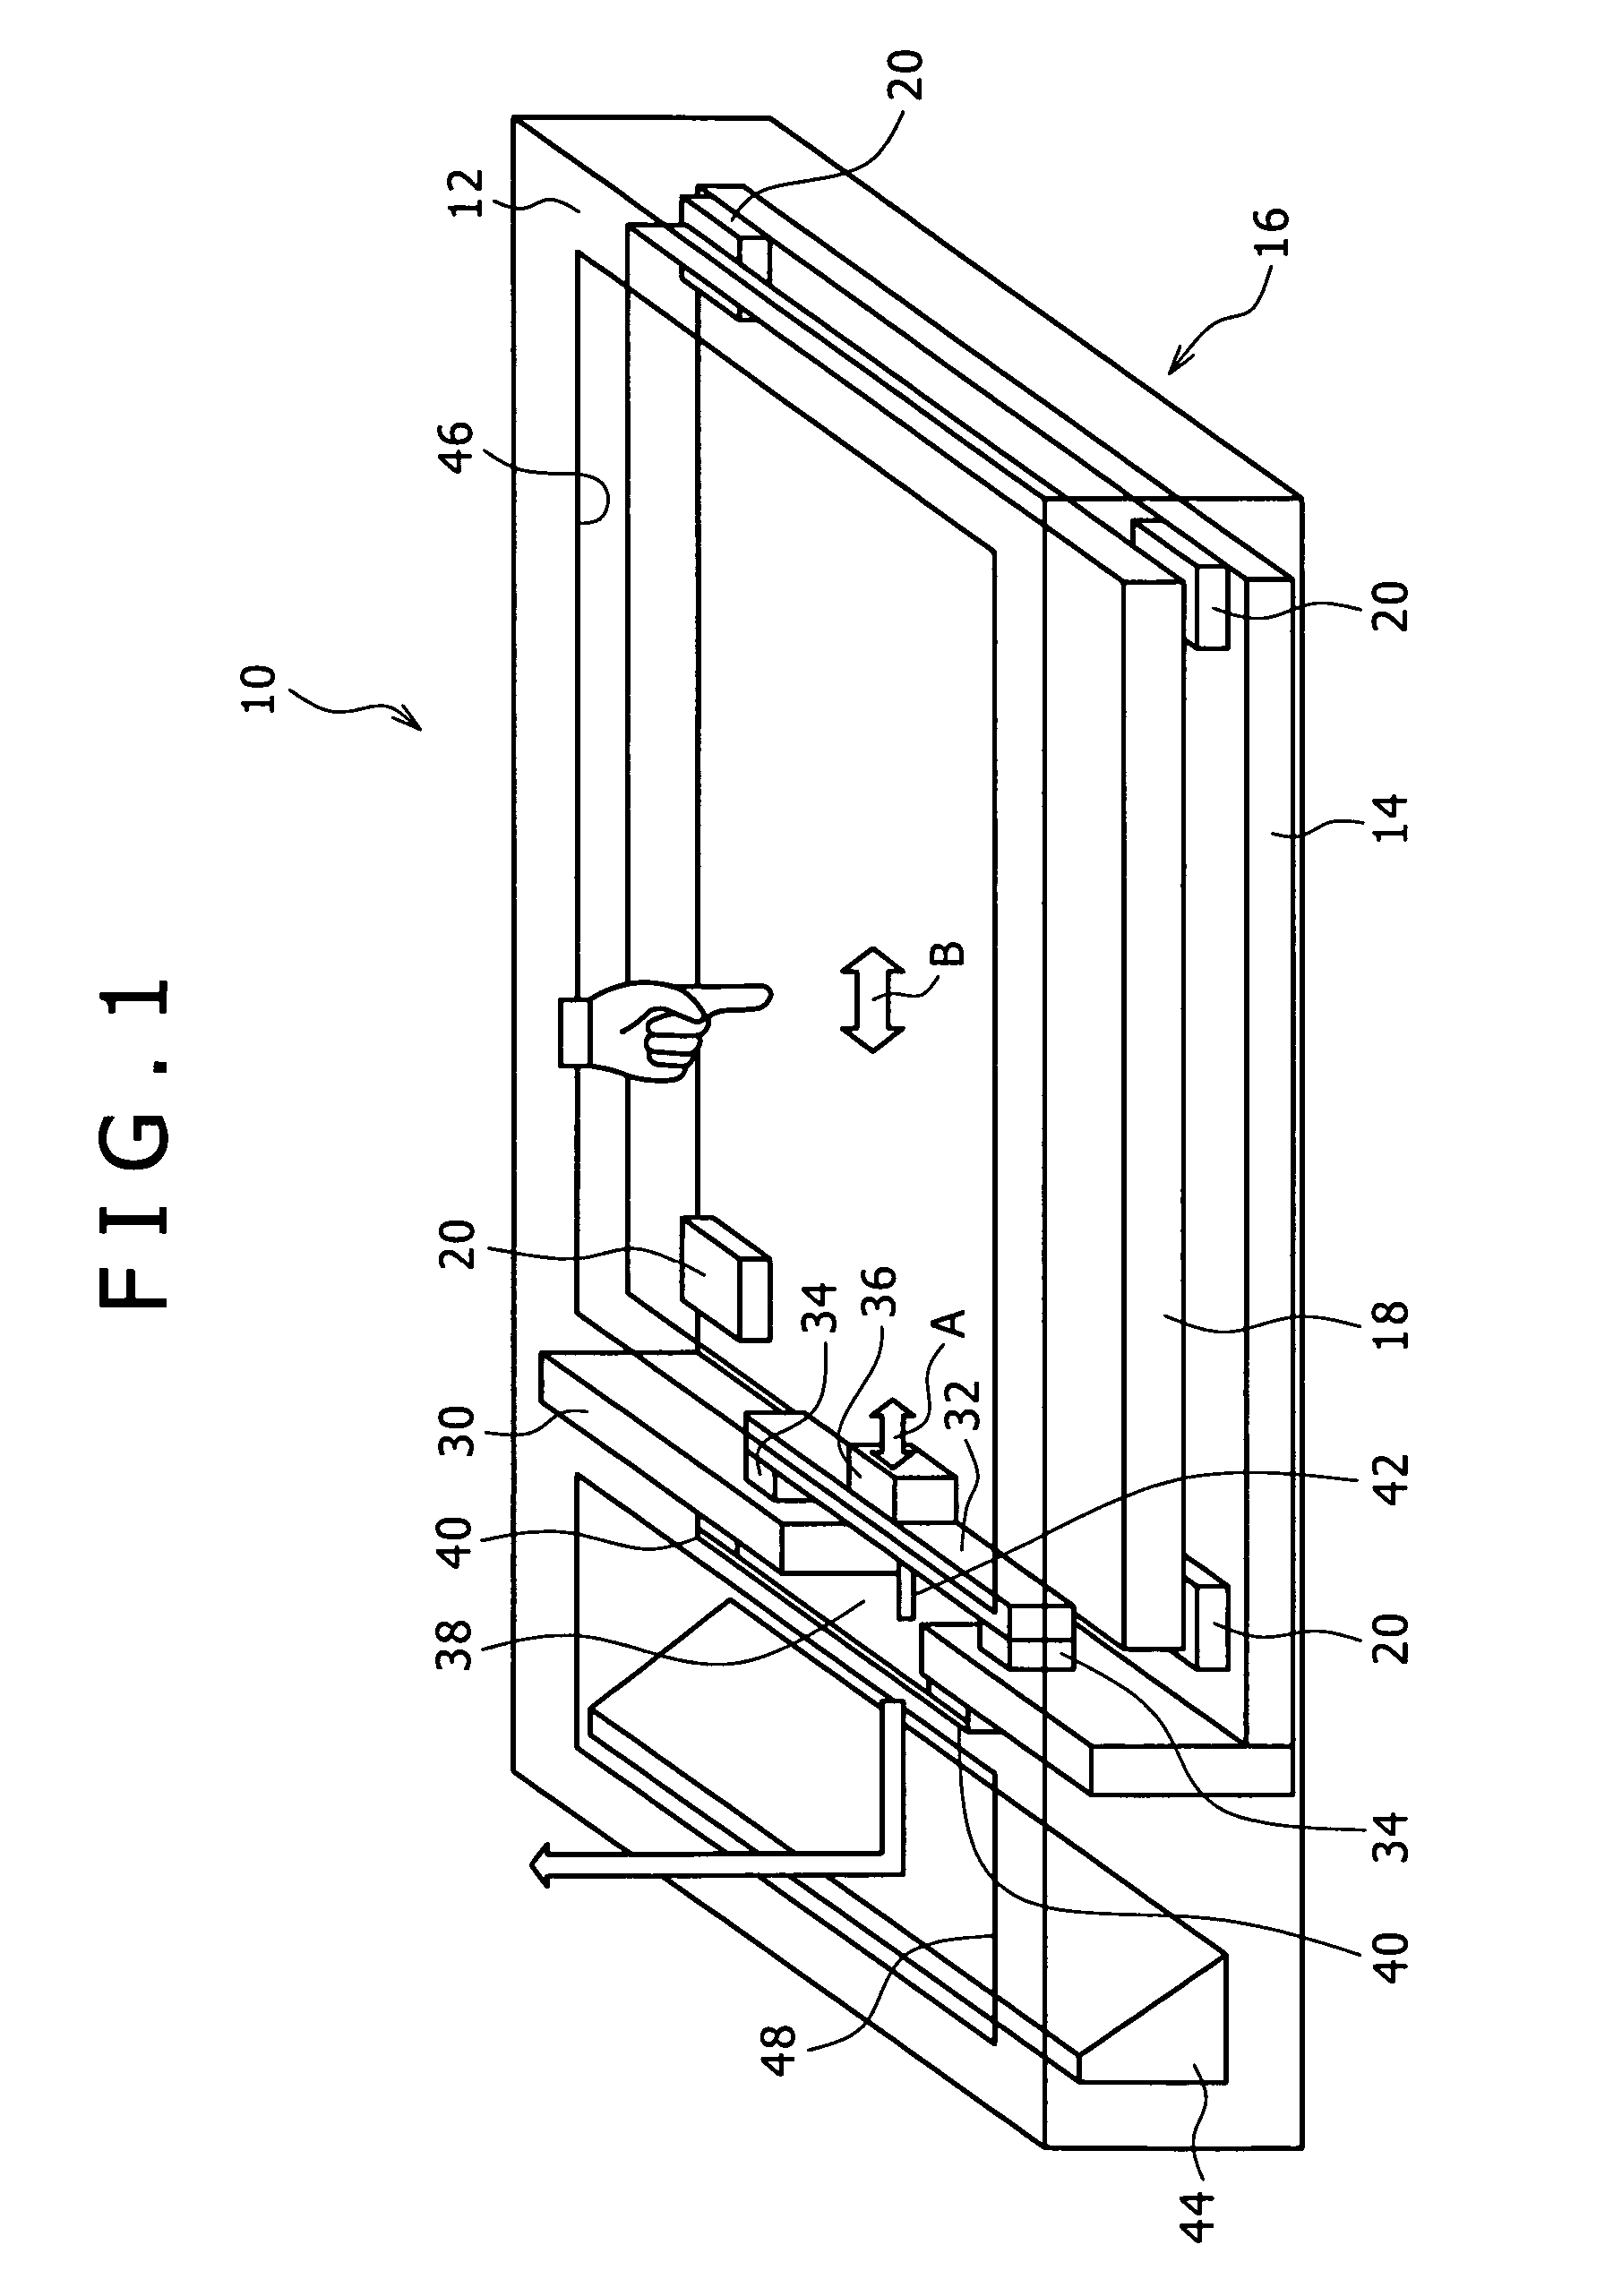 Touch panel display apparatus, electronic device having touch panel display apparatus, and camera having touch panel display apparatus